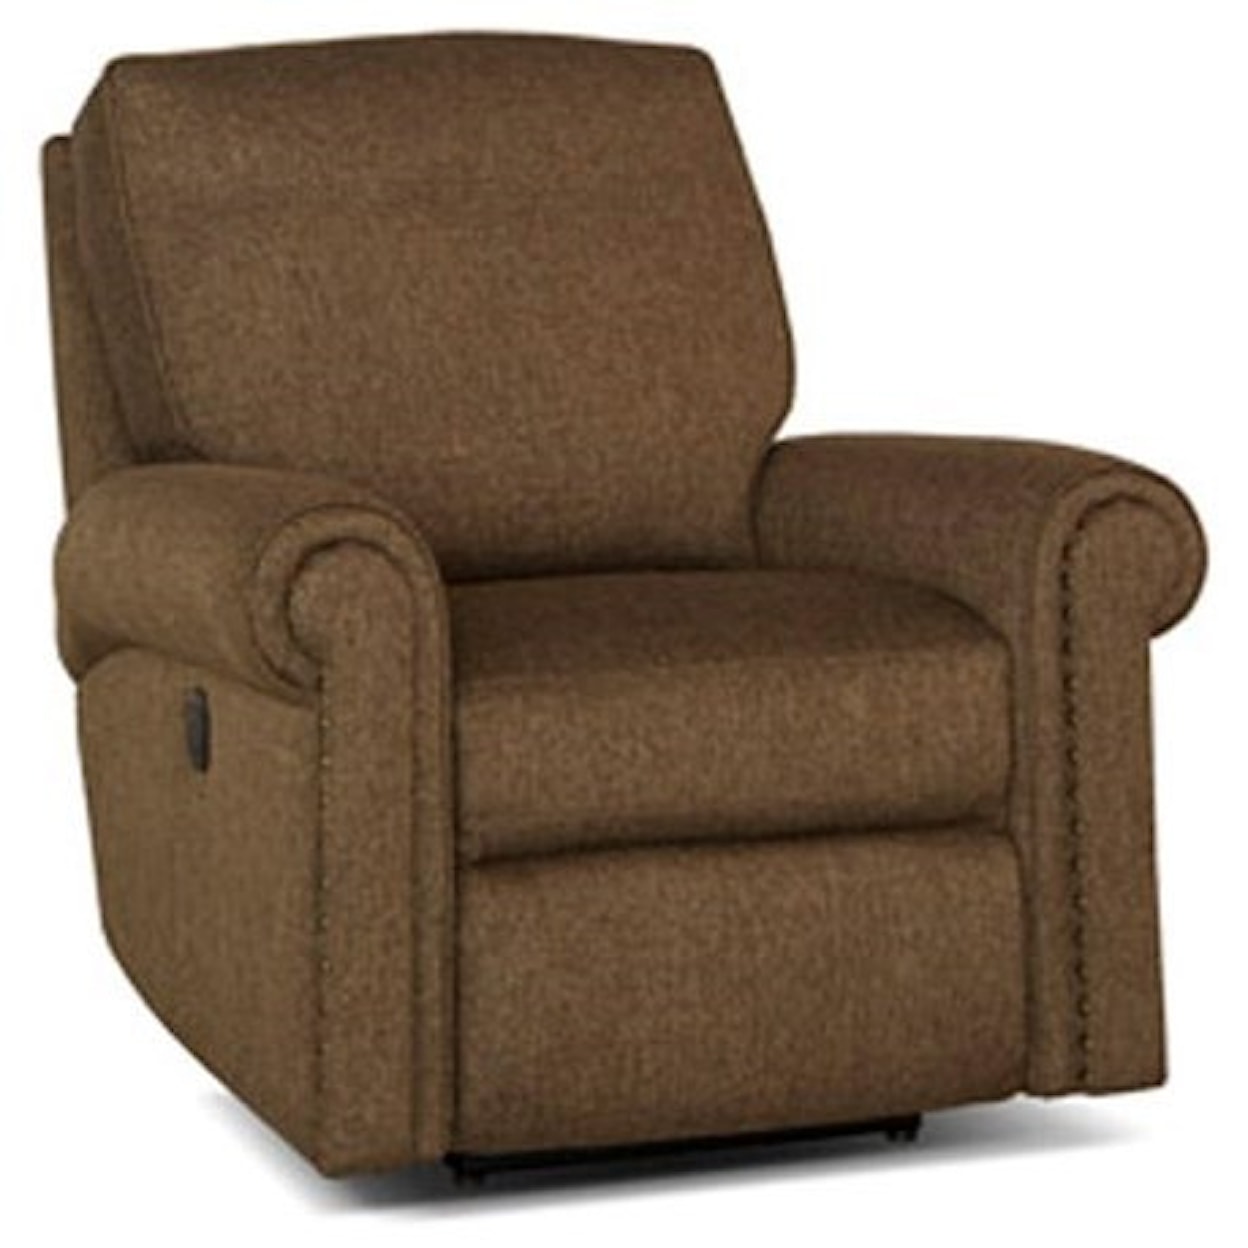 Smith Brothers 420 Manual Reclining Chair